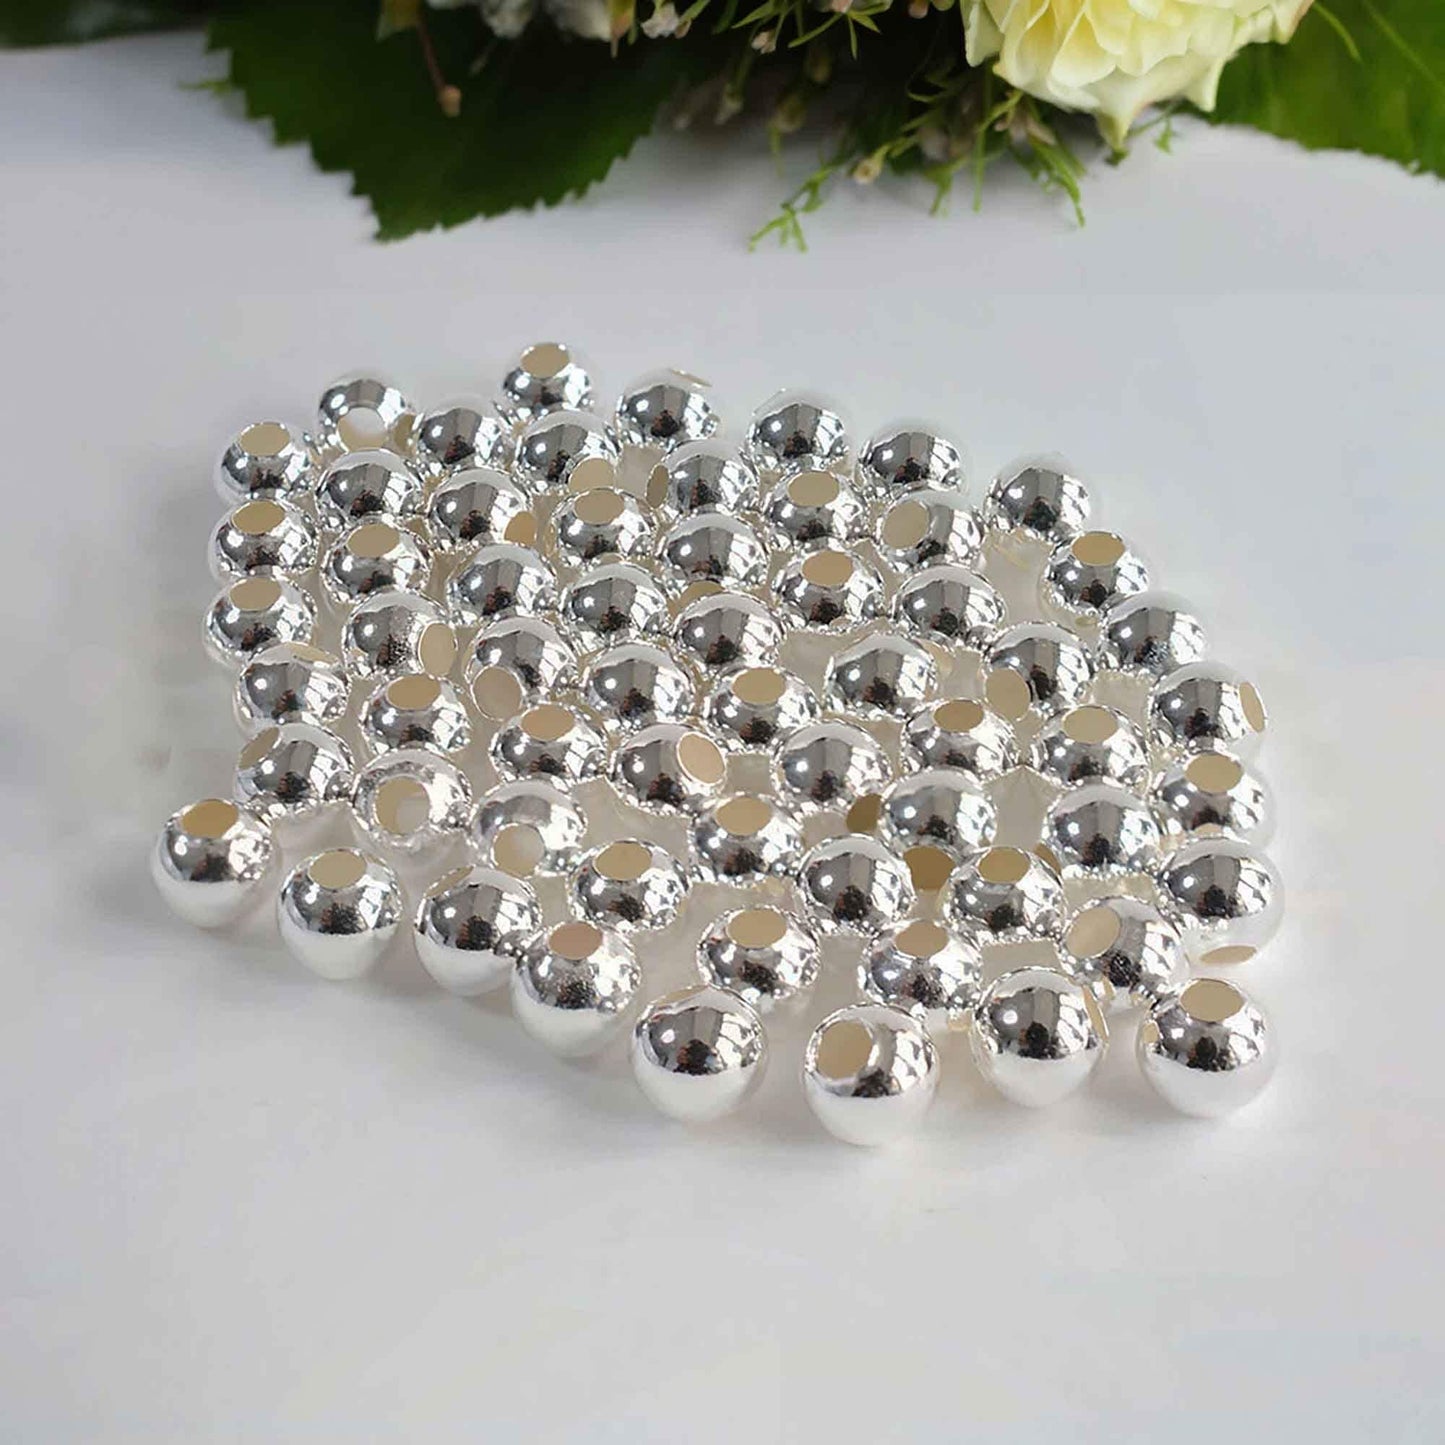 925 Sterling Silver Round Seamless Beads, Polished Spacer Ball - from 2mm to 20mm